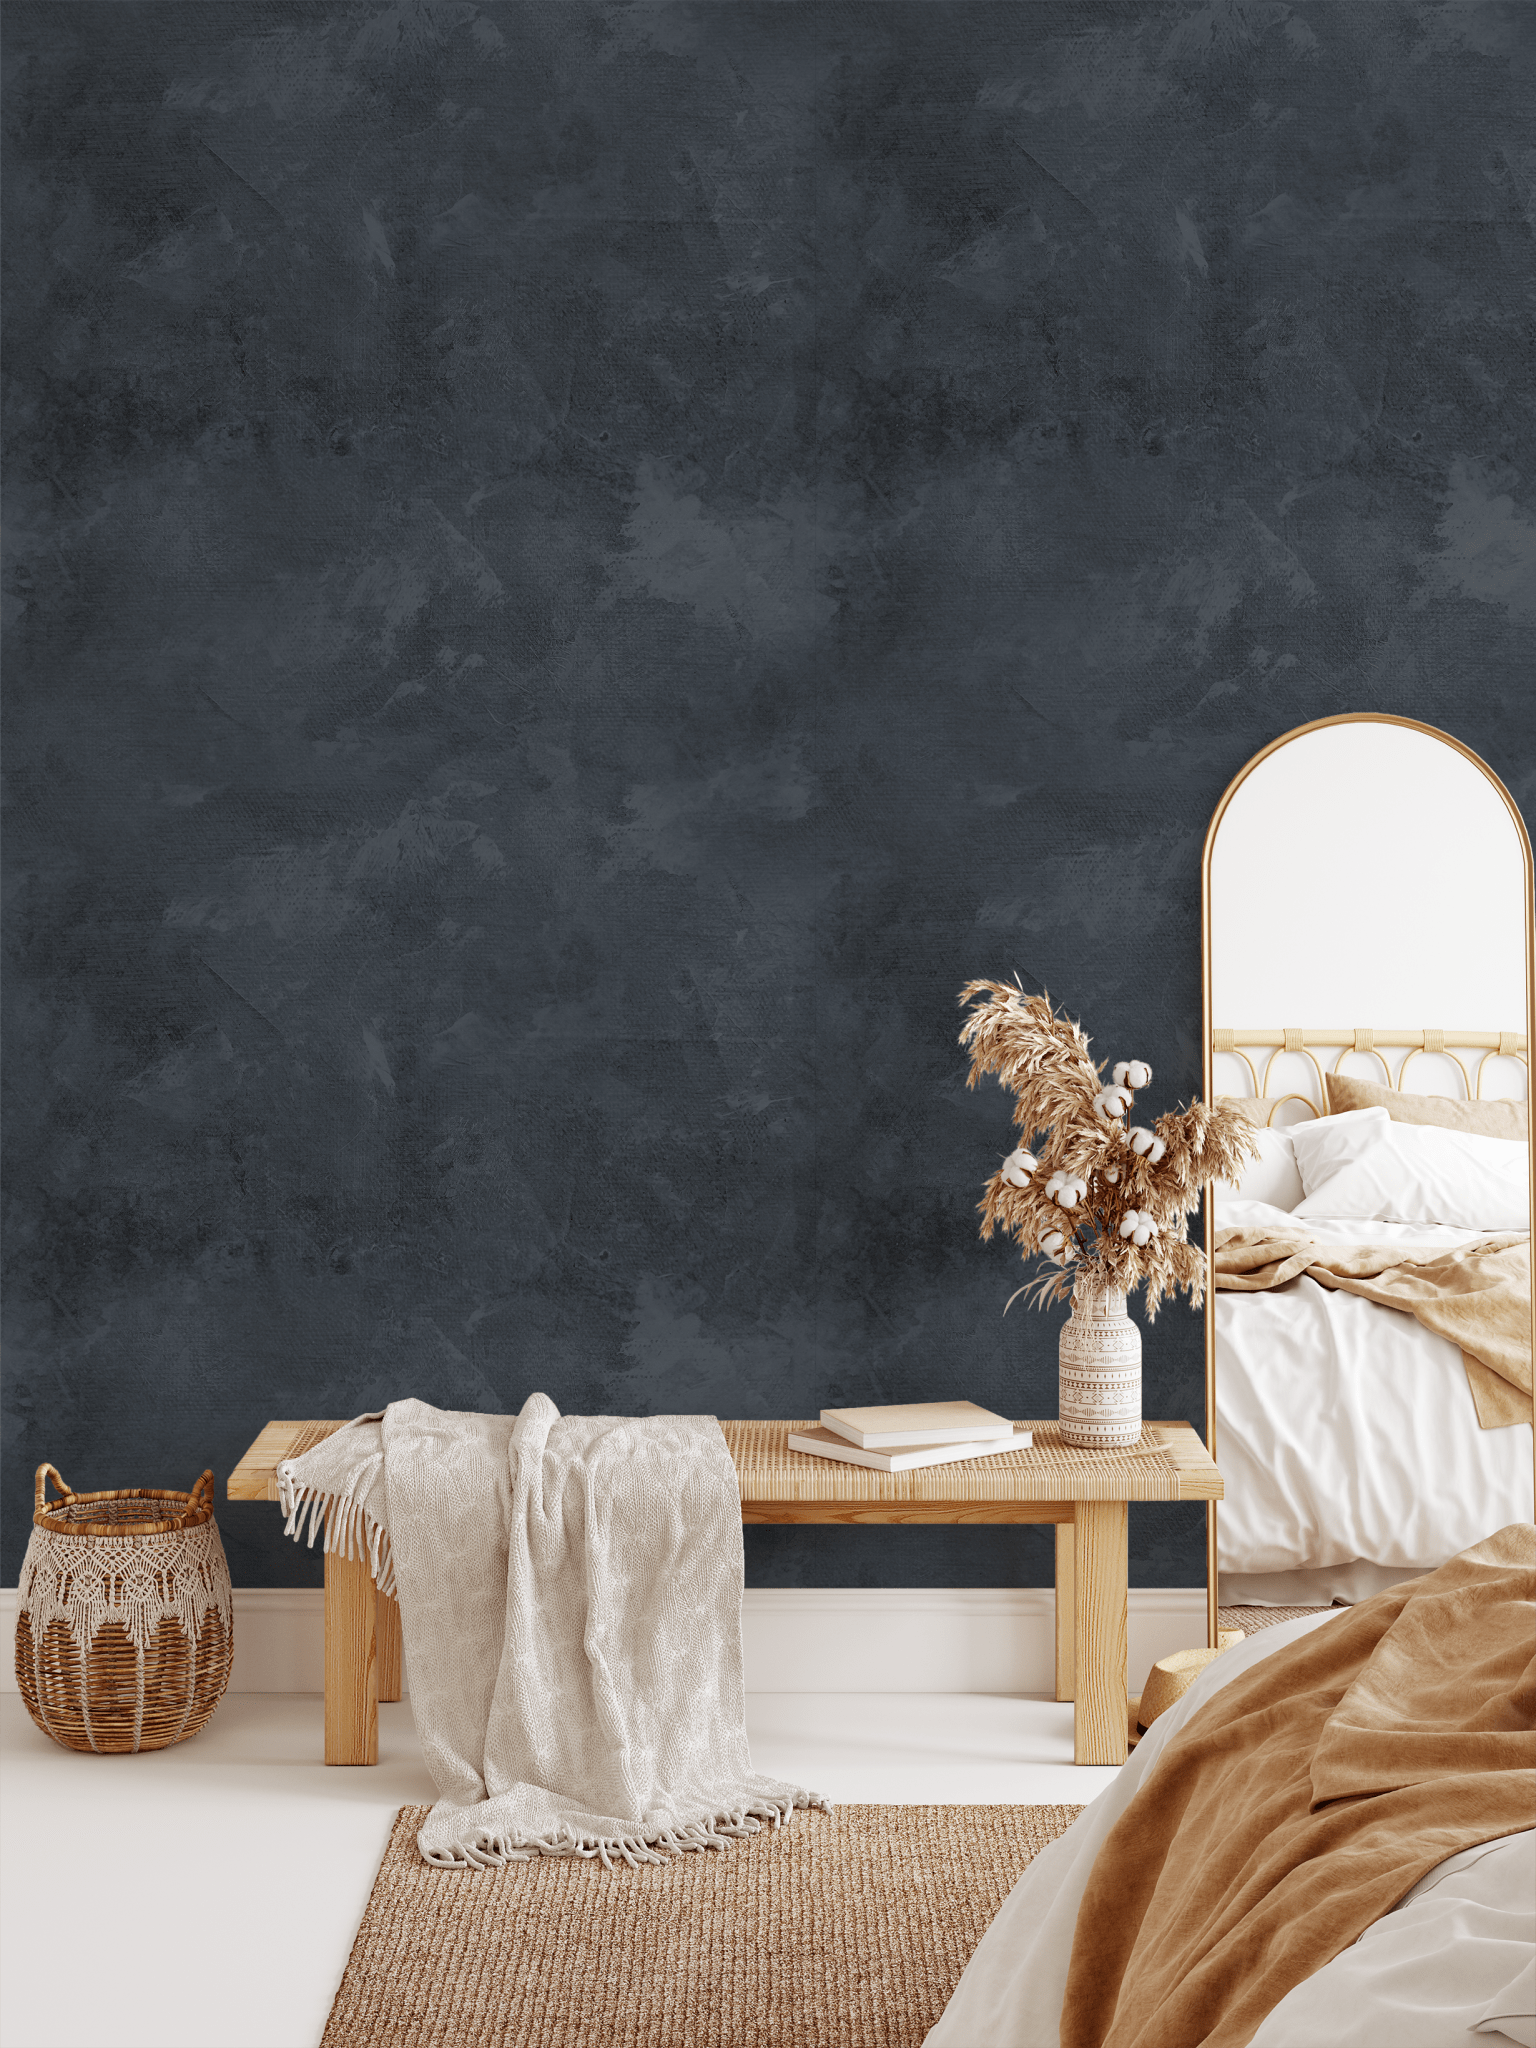 Bedroom with high-quality ink blue limewash wallpaper, gold-framed mirror, and rustic decor.